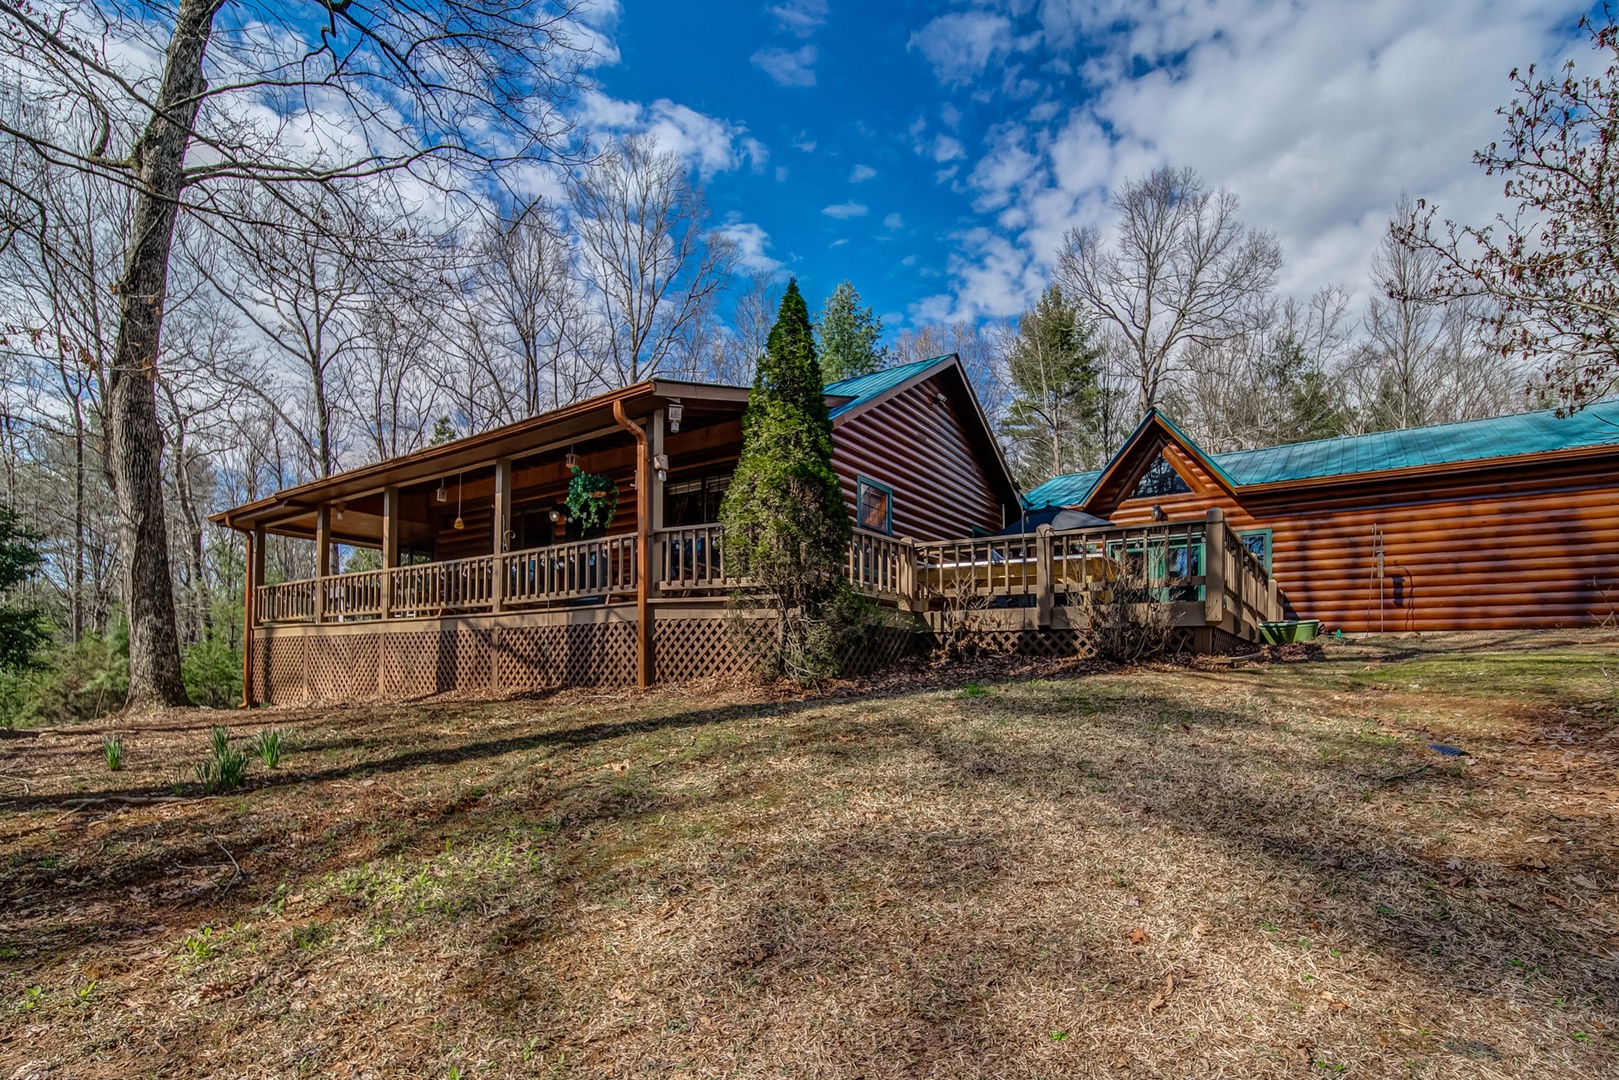 An exceptional stay awaits in this spacious Blueridge Cabin surrounded by nature with covered porch & Firepit